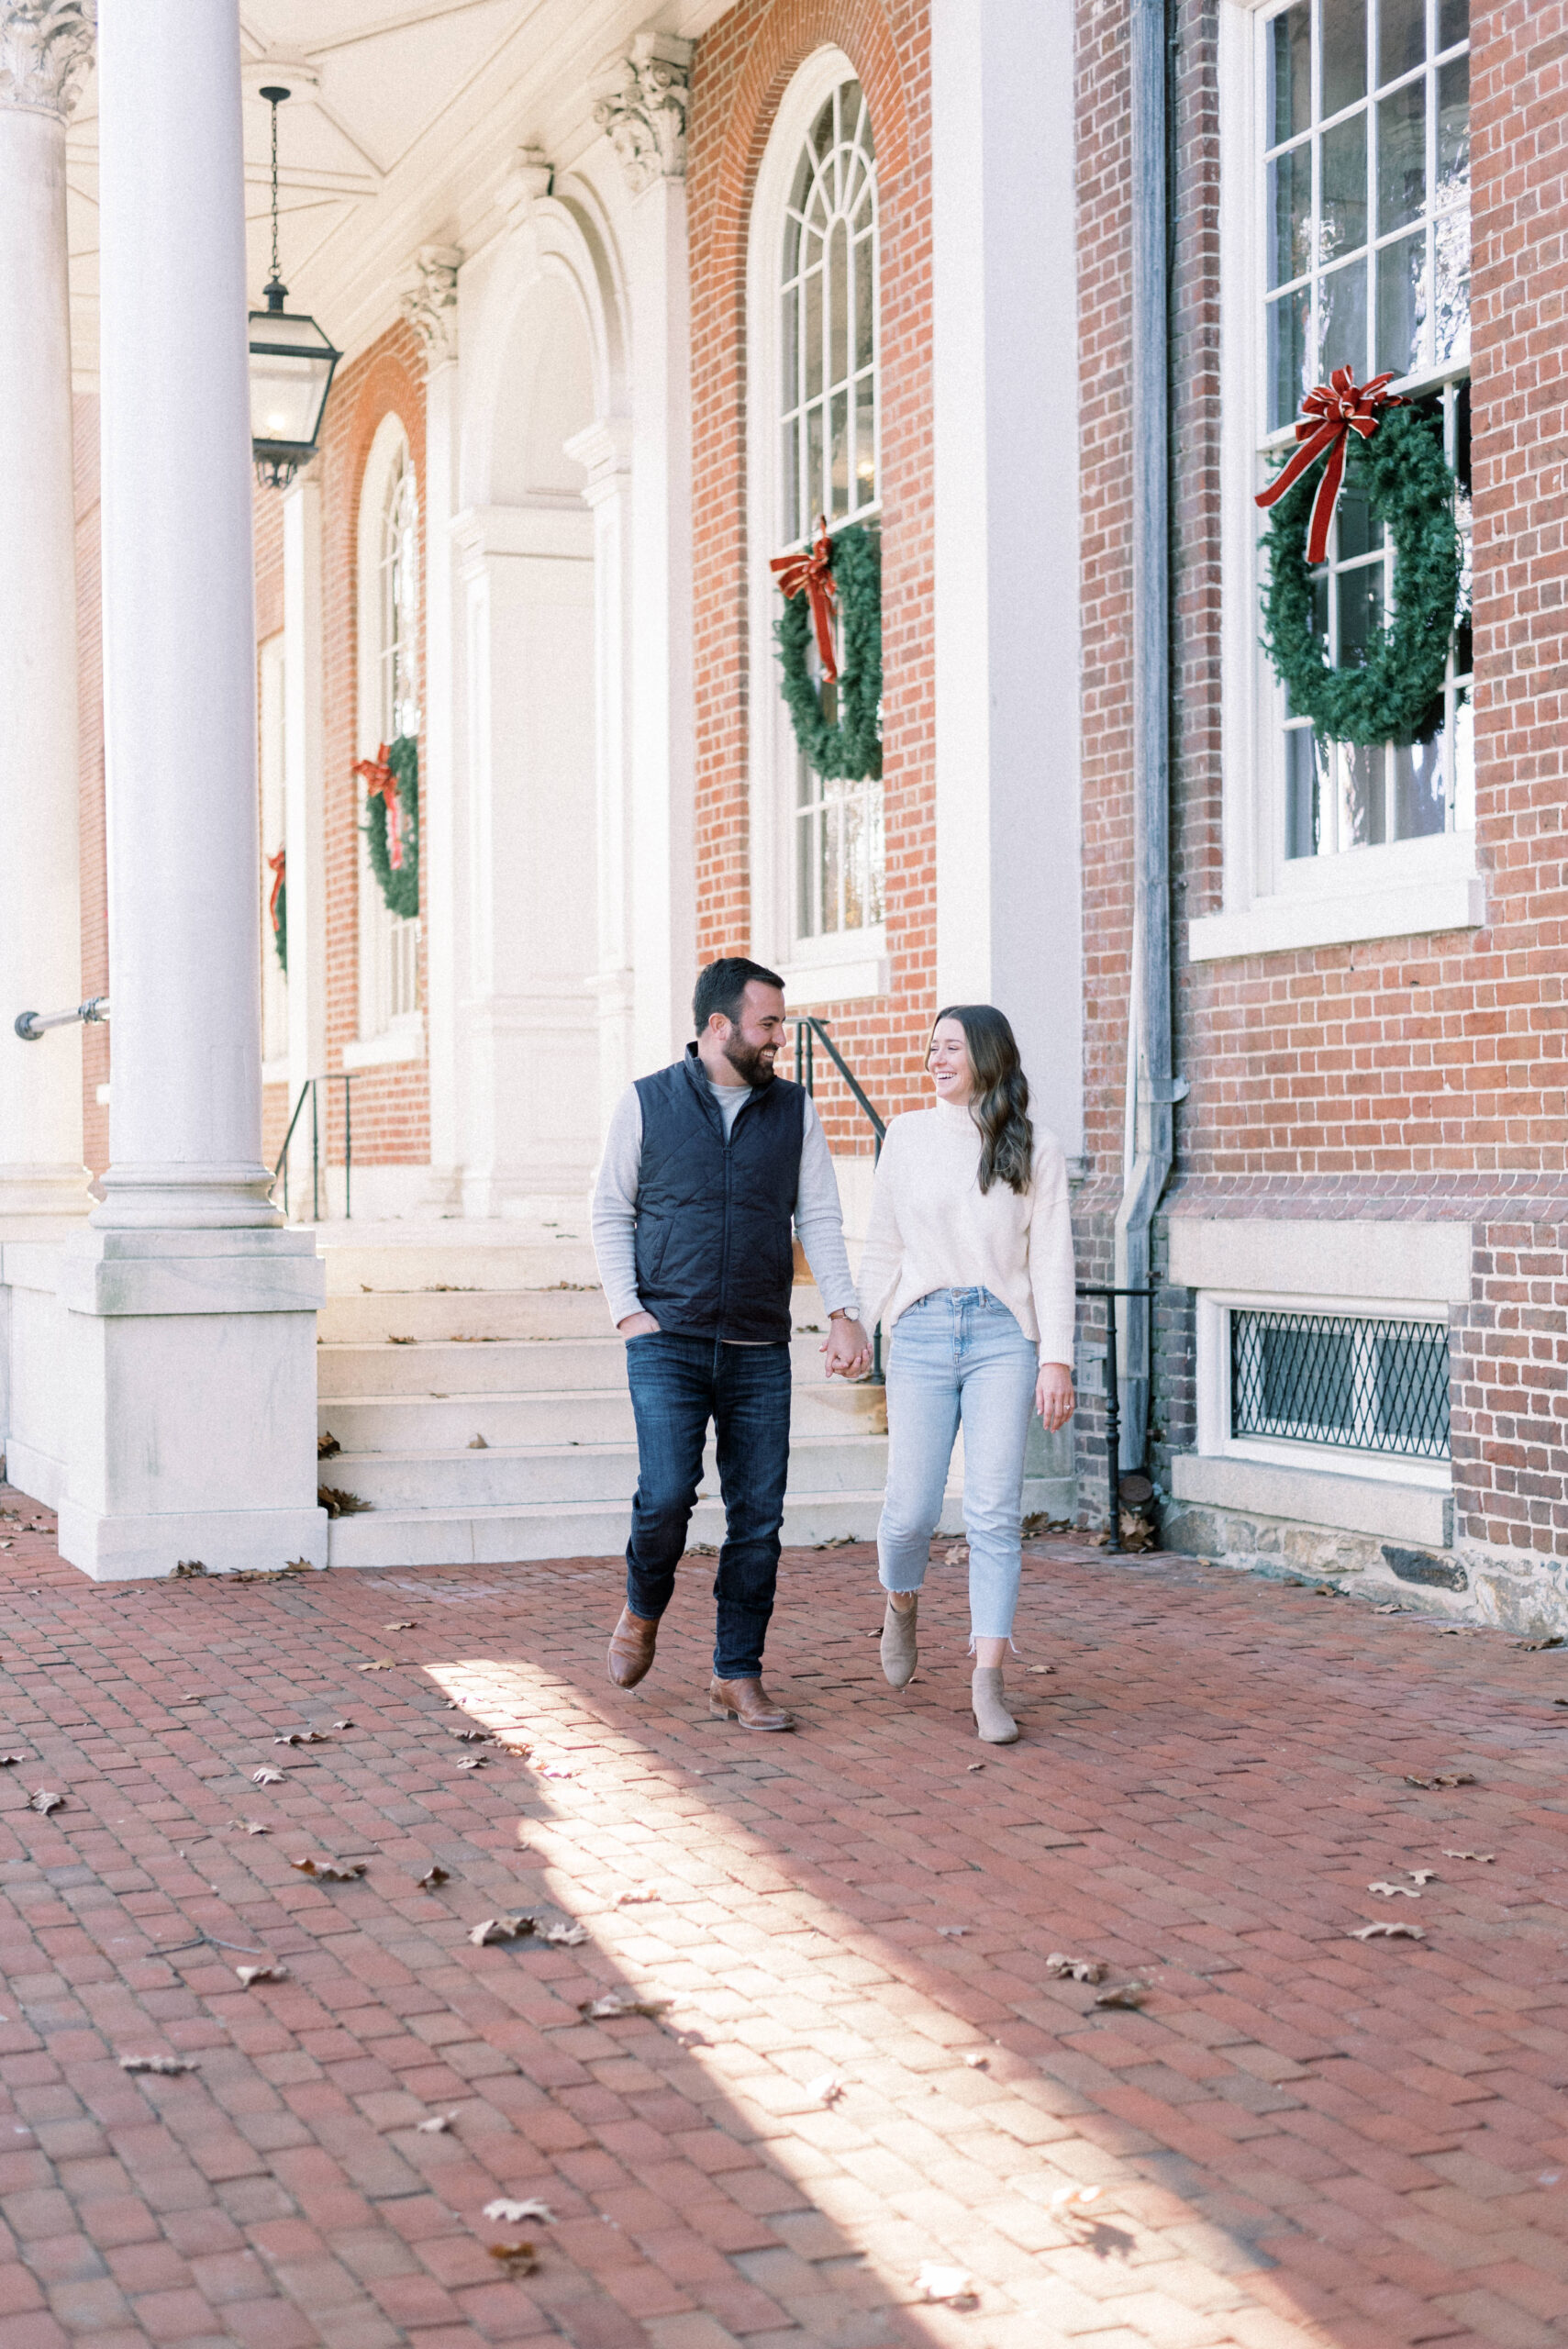 Maryland wedding photographer captures woman leading man in downtown Annapolis